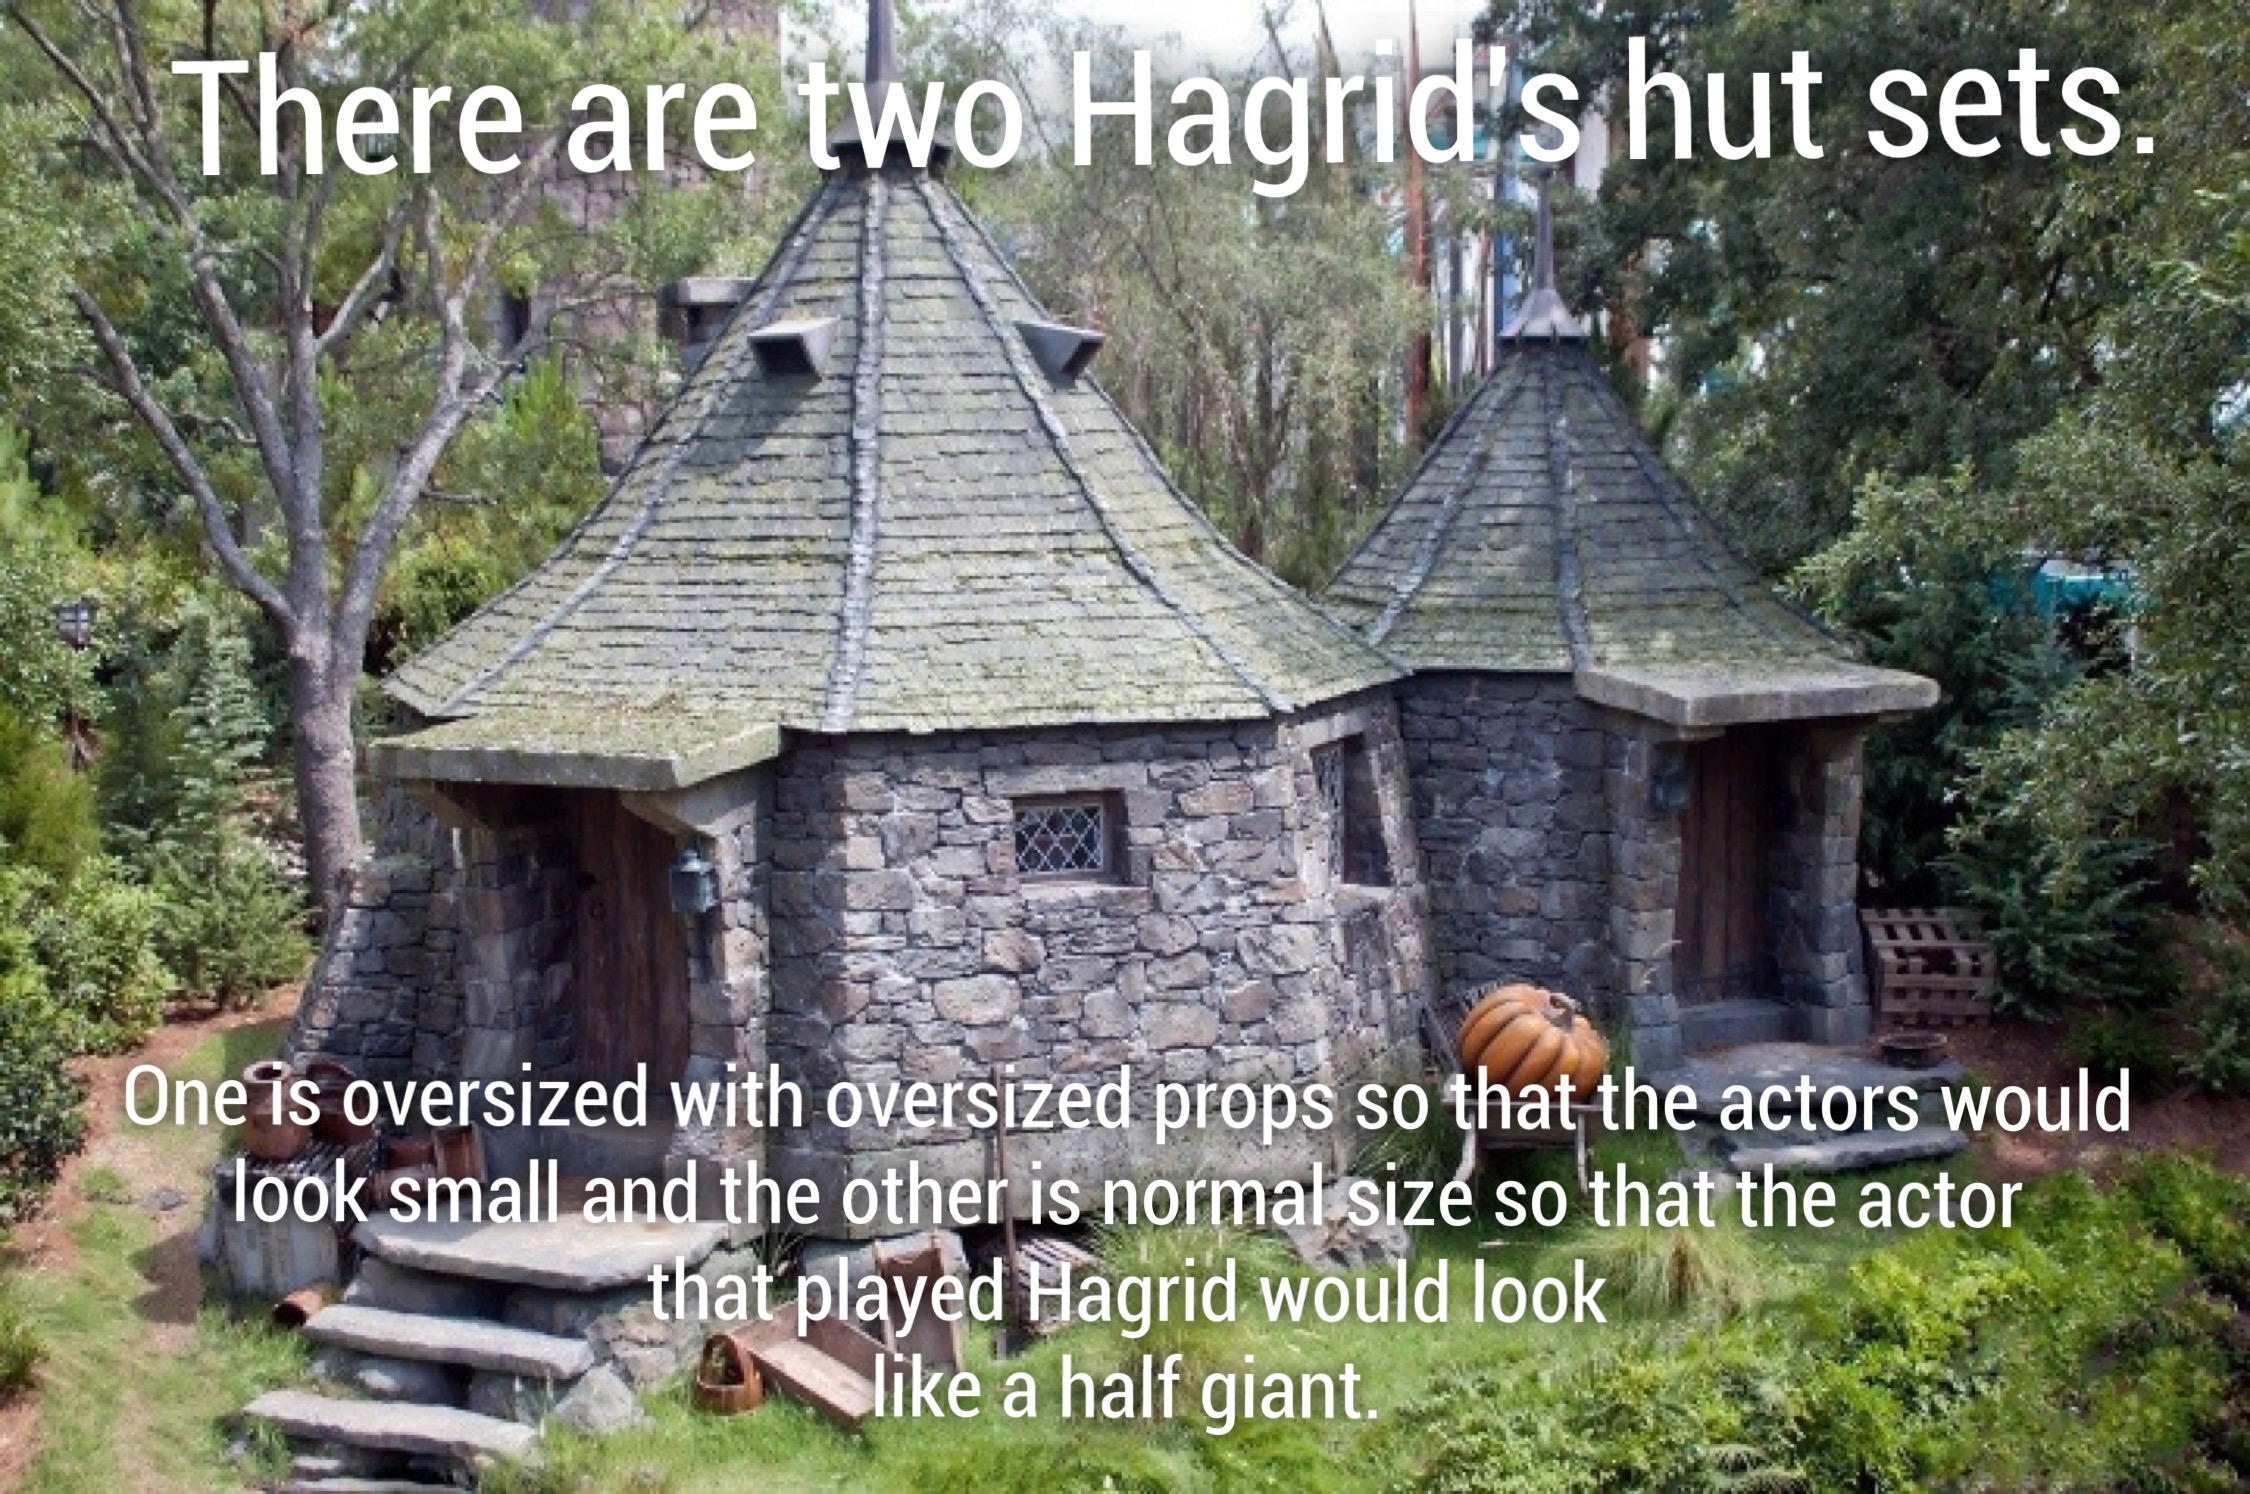 hagrid's hut - There are two Hagrid's hut sets. One is oversized with oversized props so that the actors would look small and the other is normal size so that the actor that played Hagrid would look a half giant. look small and folaved Hag